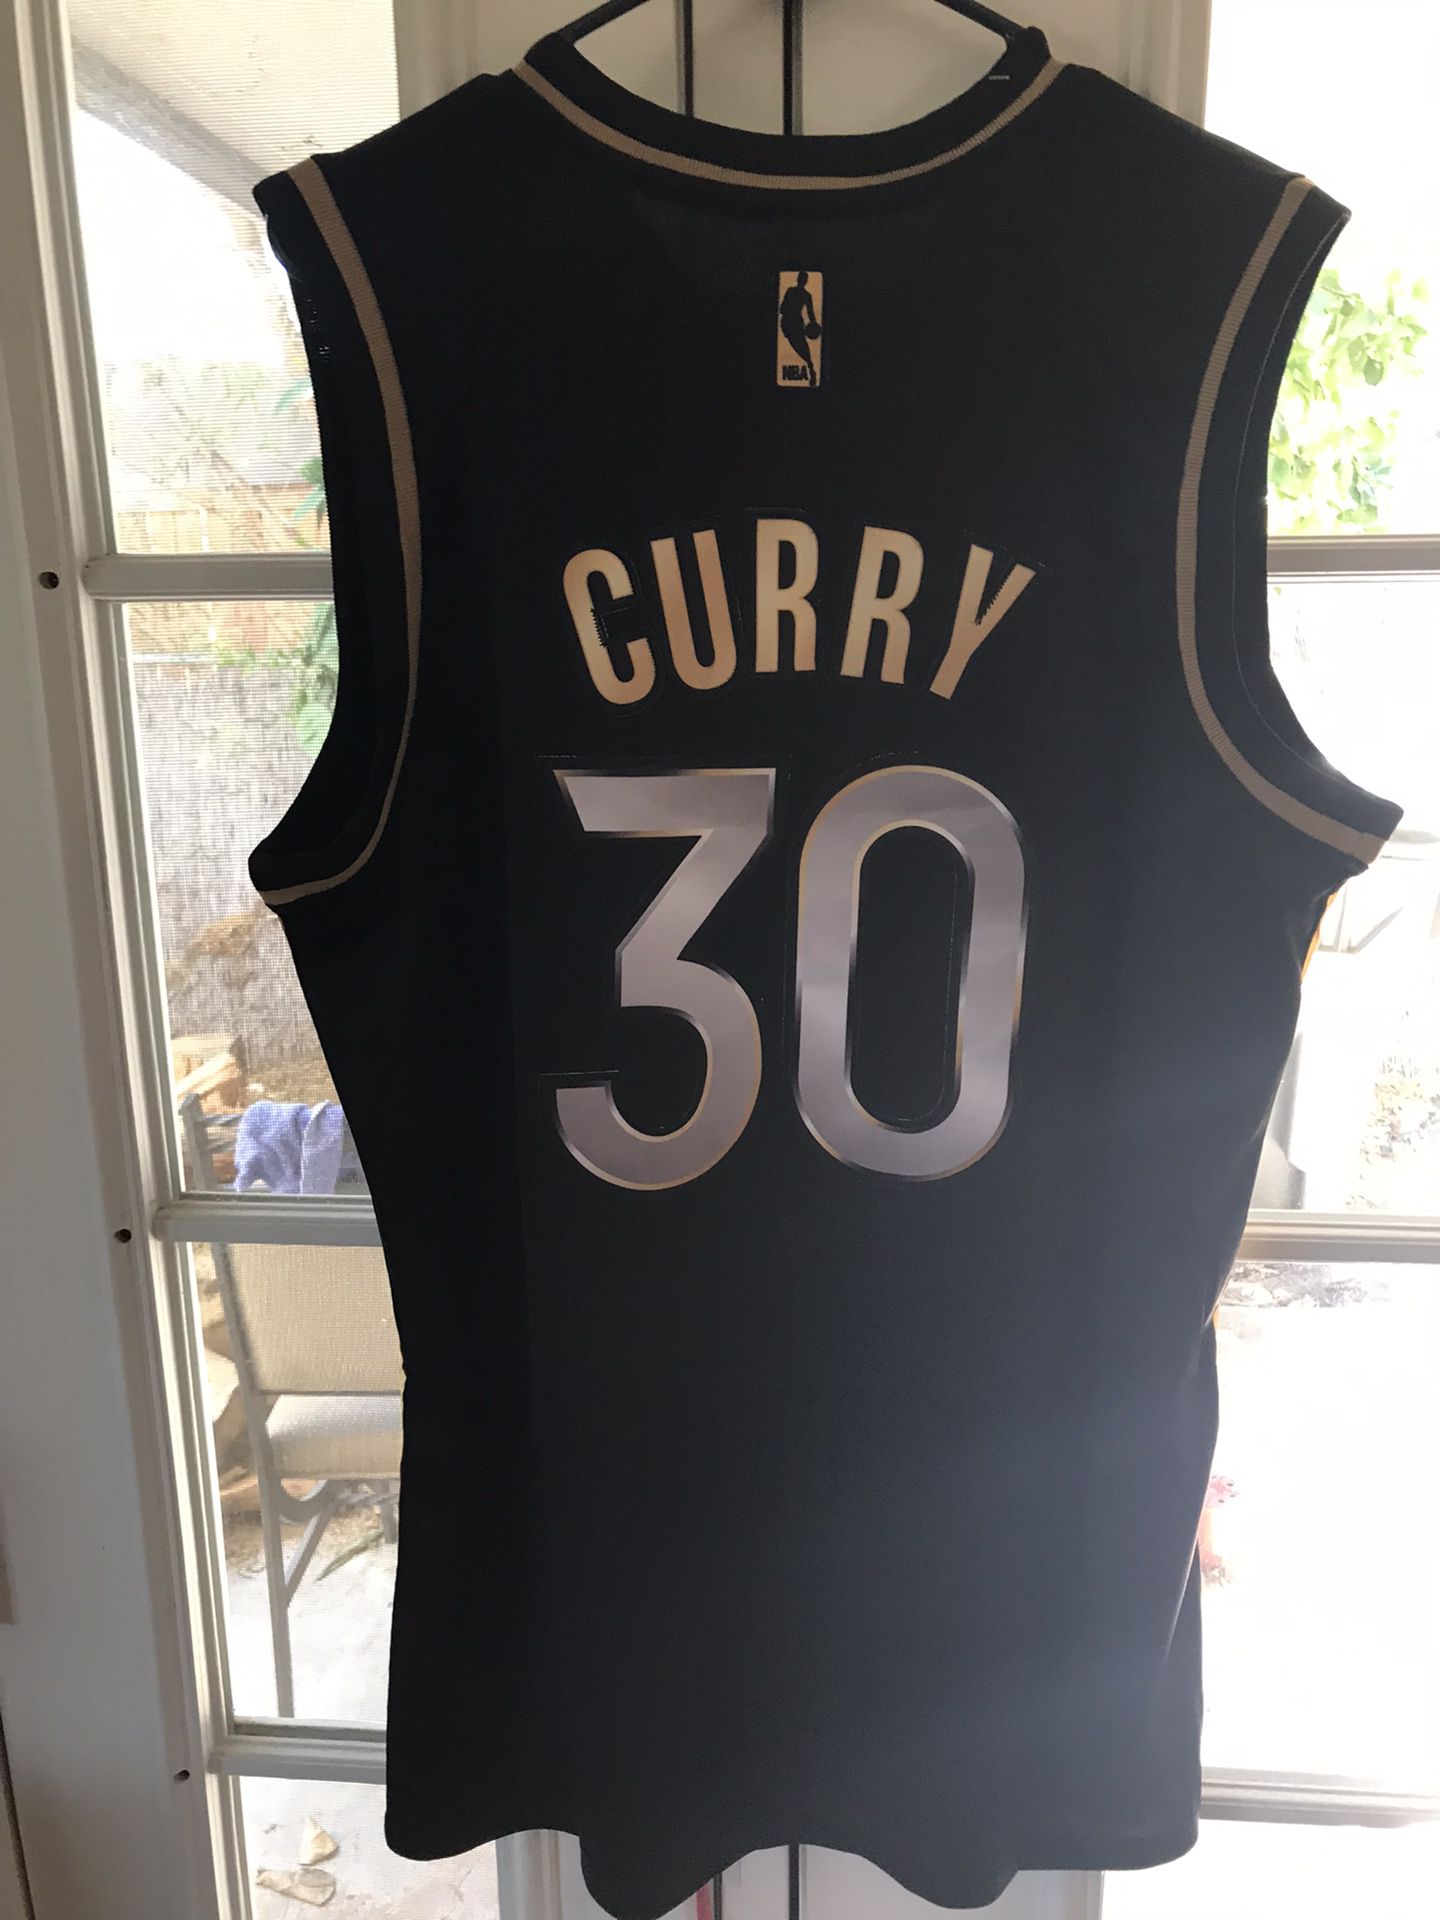 Golden State Warriors Nike Chinese Heritage THE BAY Steph Curry Jersey  Youth XL for Sale in Pinole, CA - OfferUp